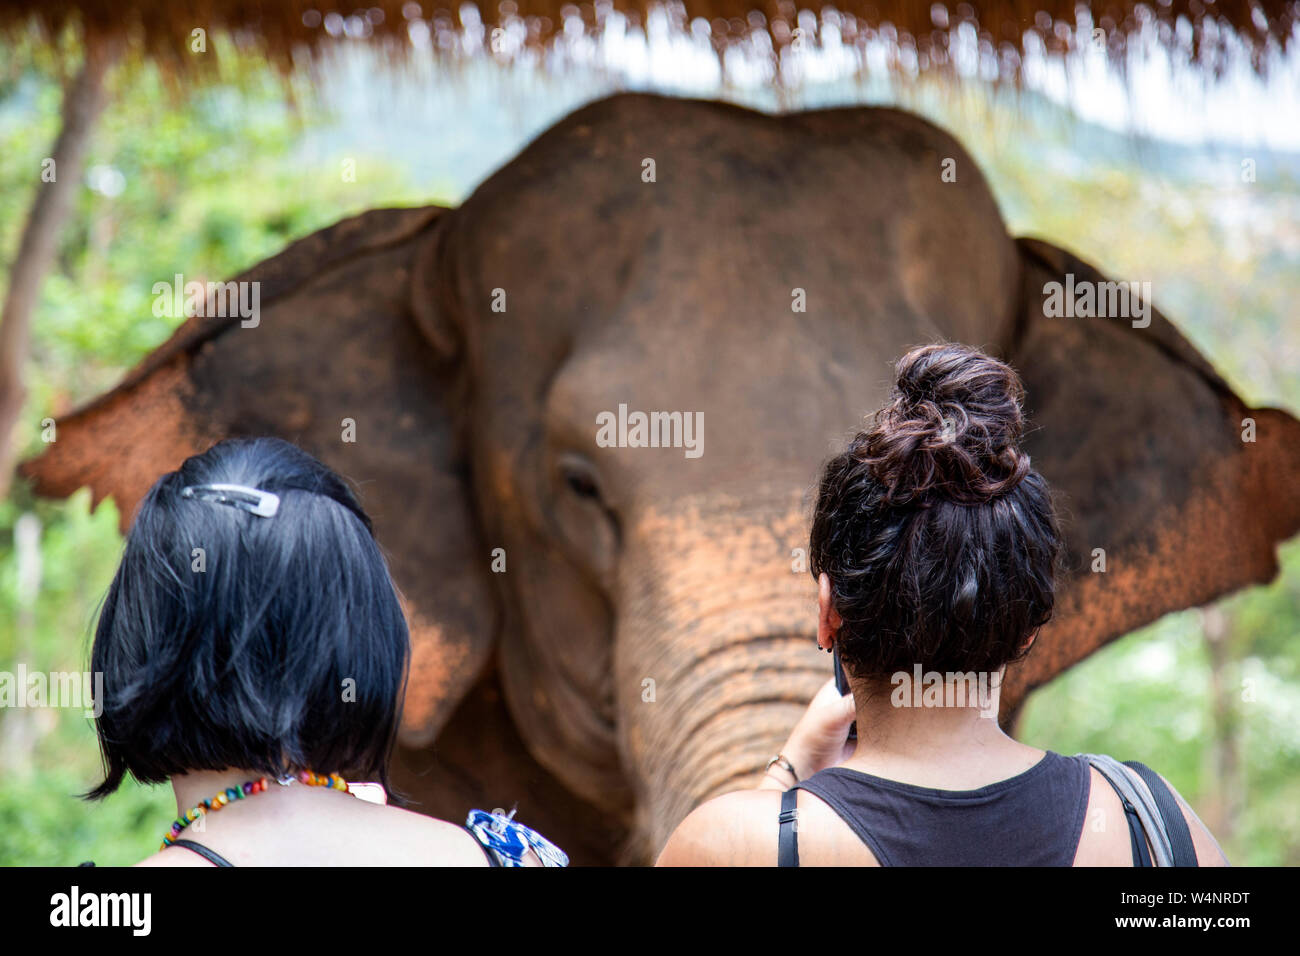 Two Women Visiting an Injured Elephant at a Local Elephant Sanctuary Stock Photo